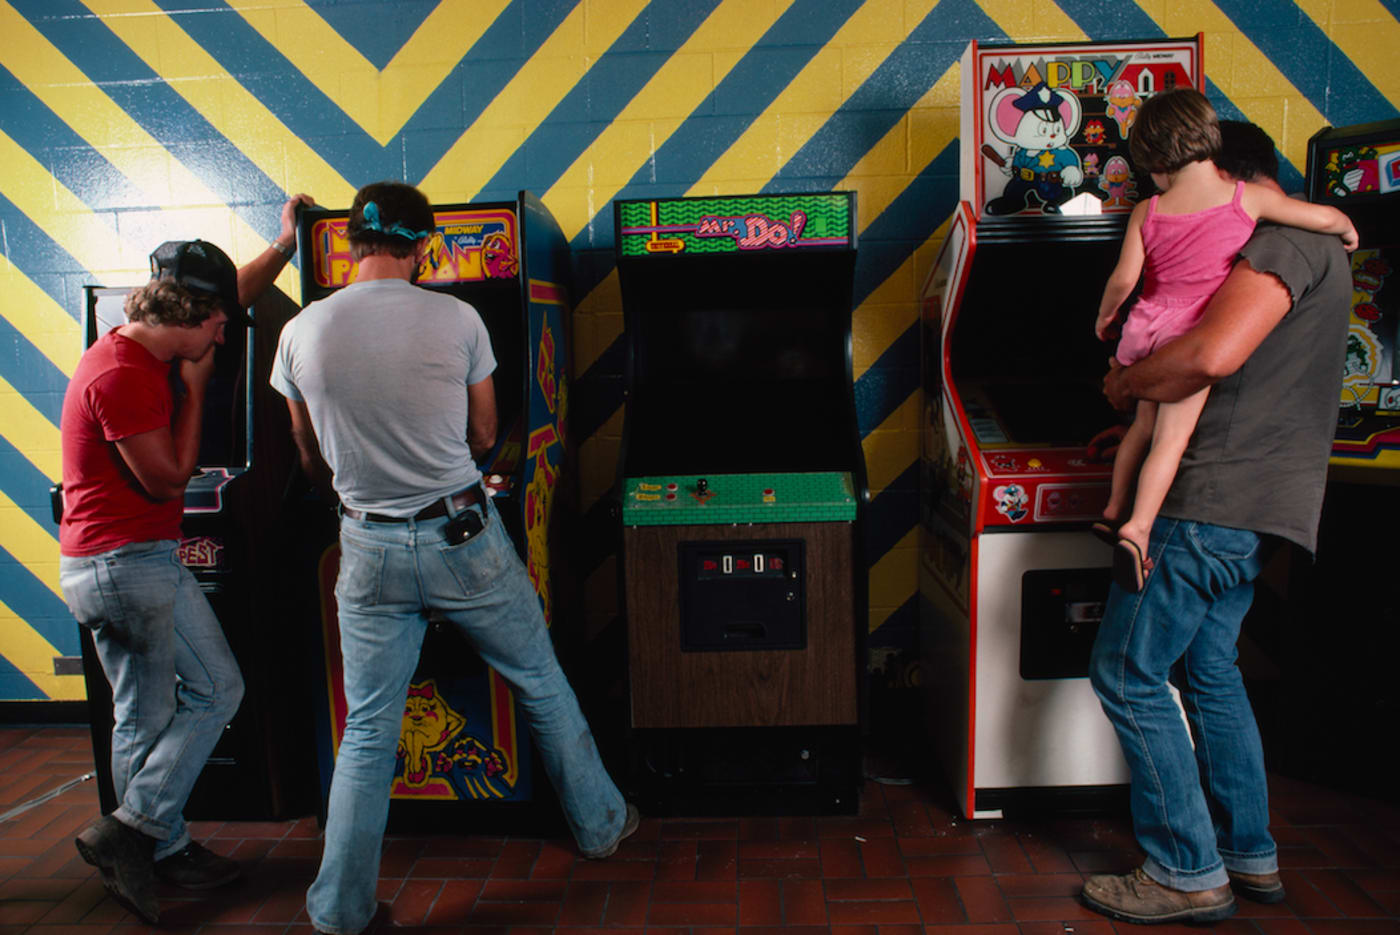 Xxx Video Games Www Com - The 30 Best Arcade Video Games of the 1990s | Complex